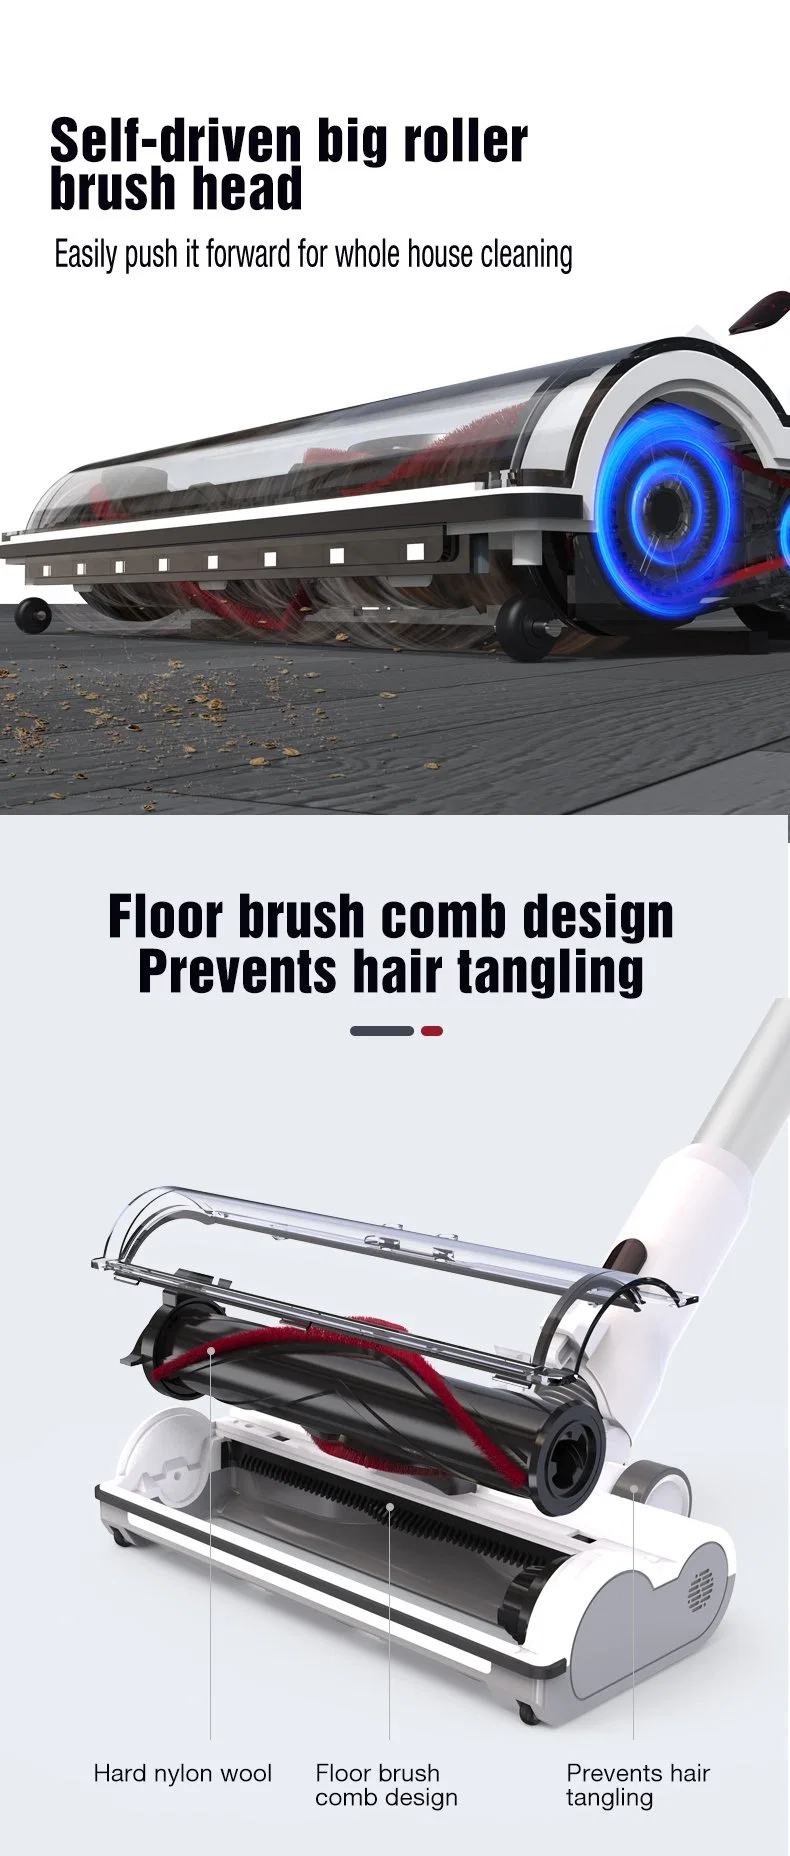 Cordless Vacuum Cleaner, 24kpa Powerful Suction Vacuum with LED Display